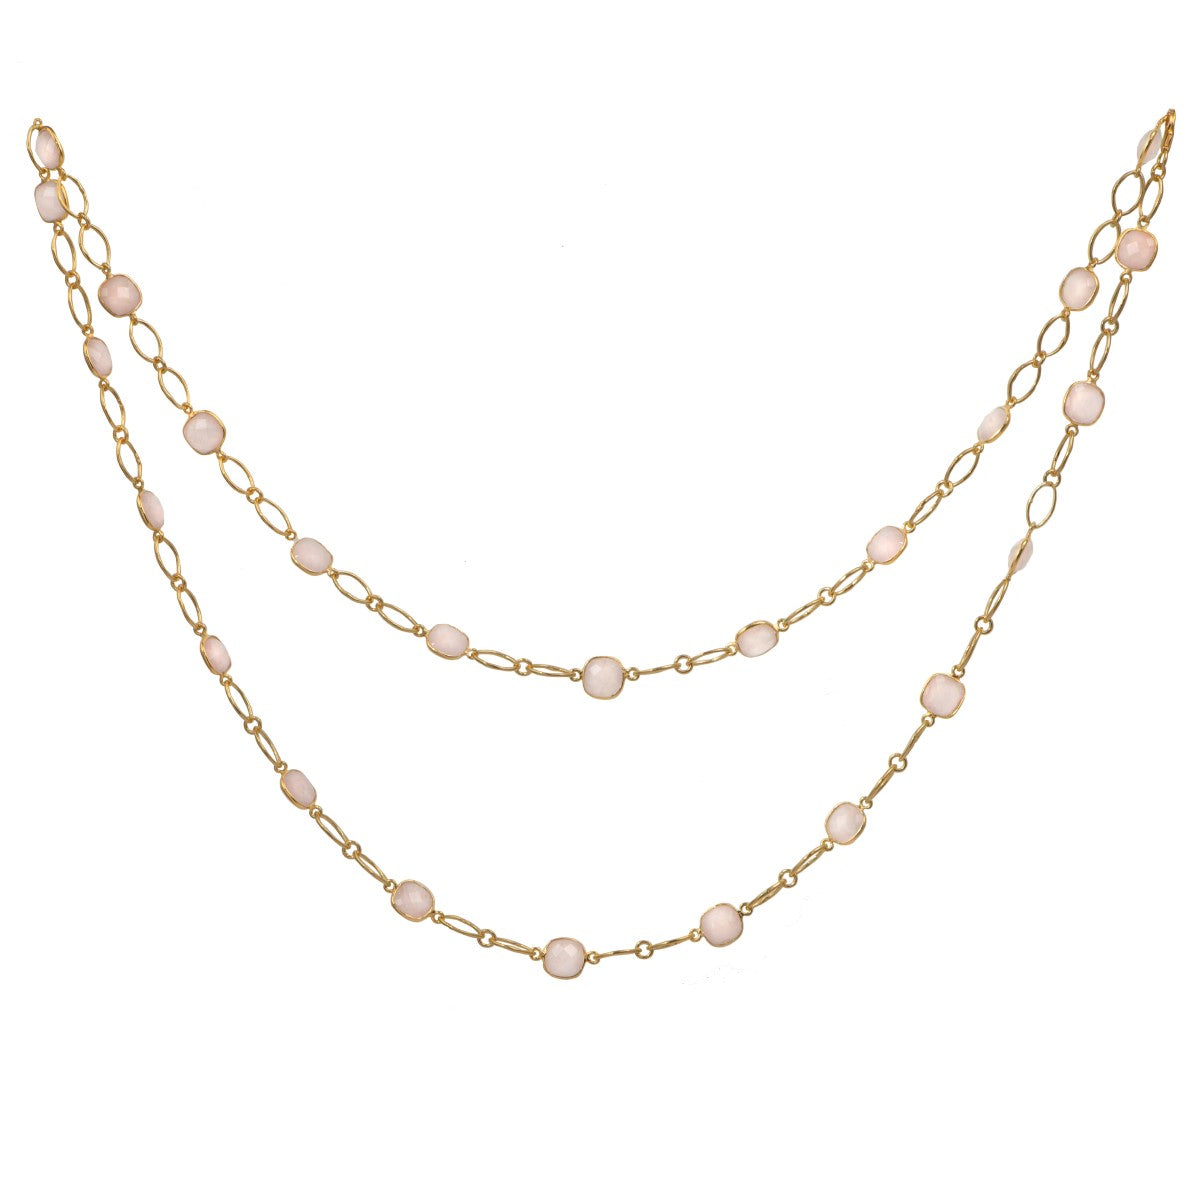 Rose Quartz Gold Plated Sterling Silver Long Statement Necklace with Large Oval Links Chain